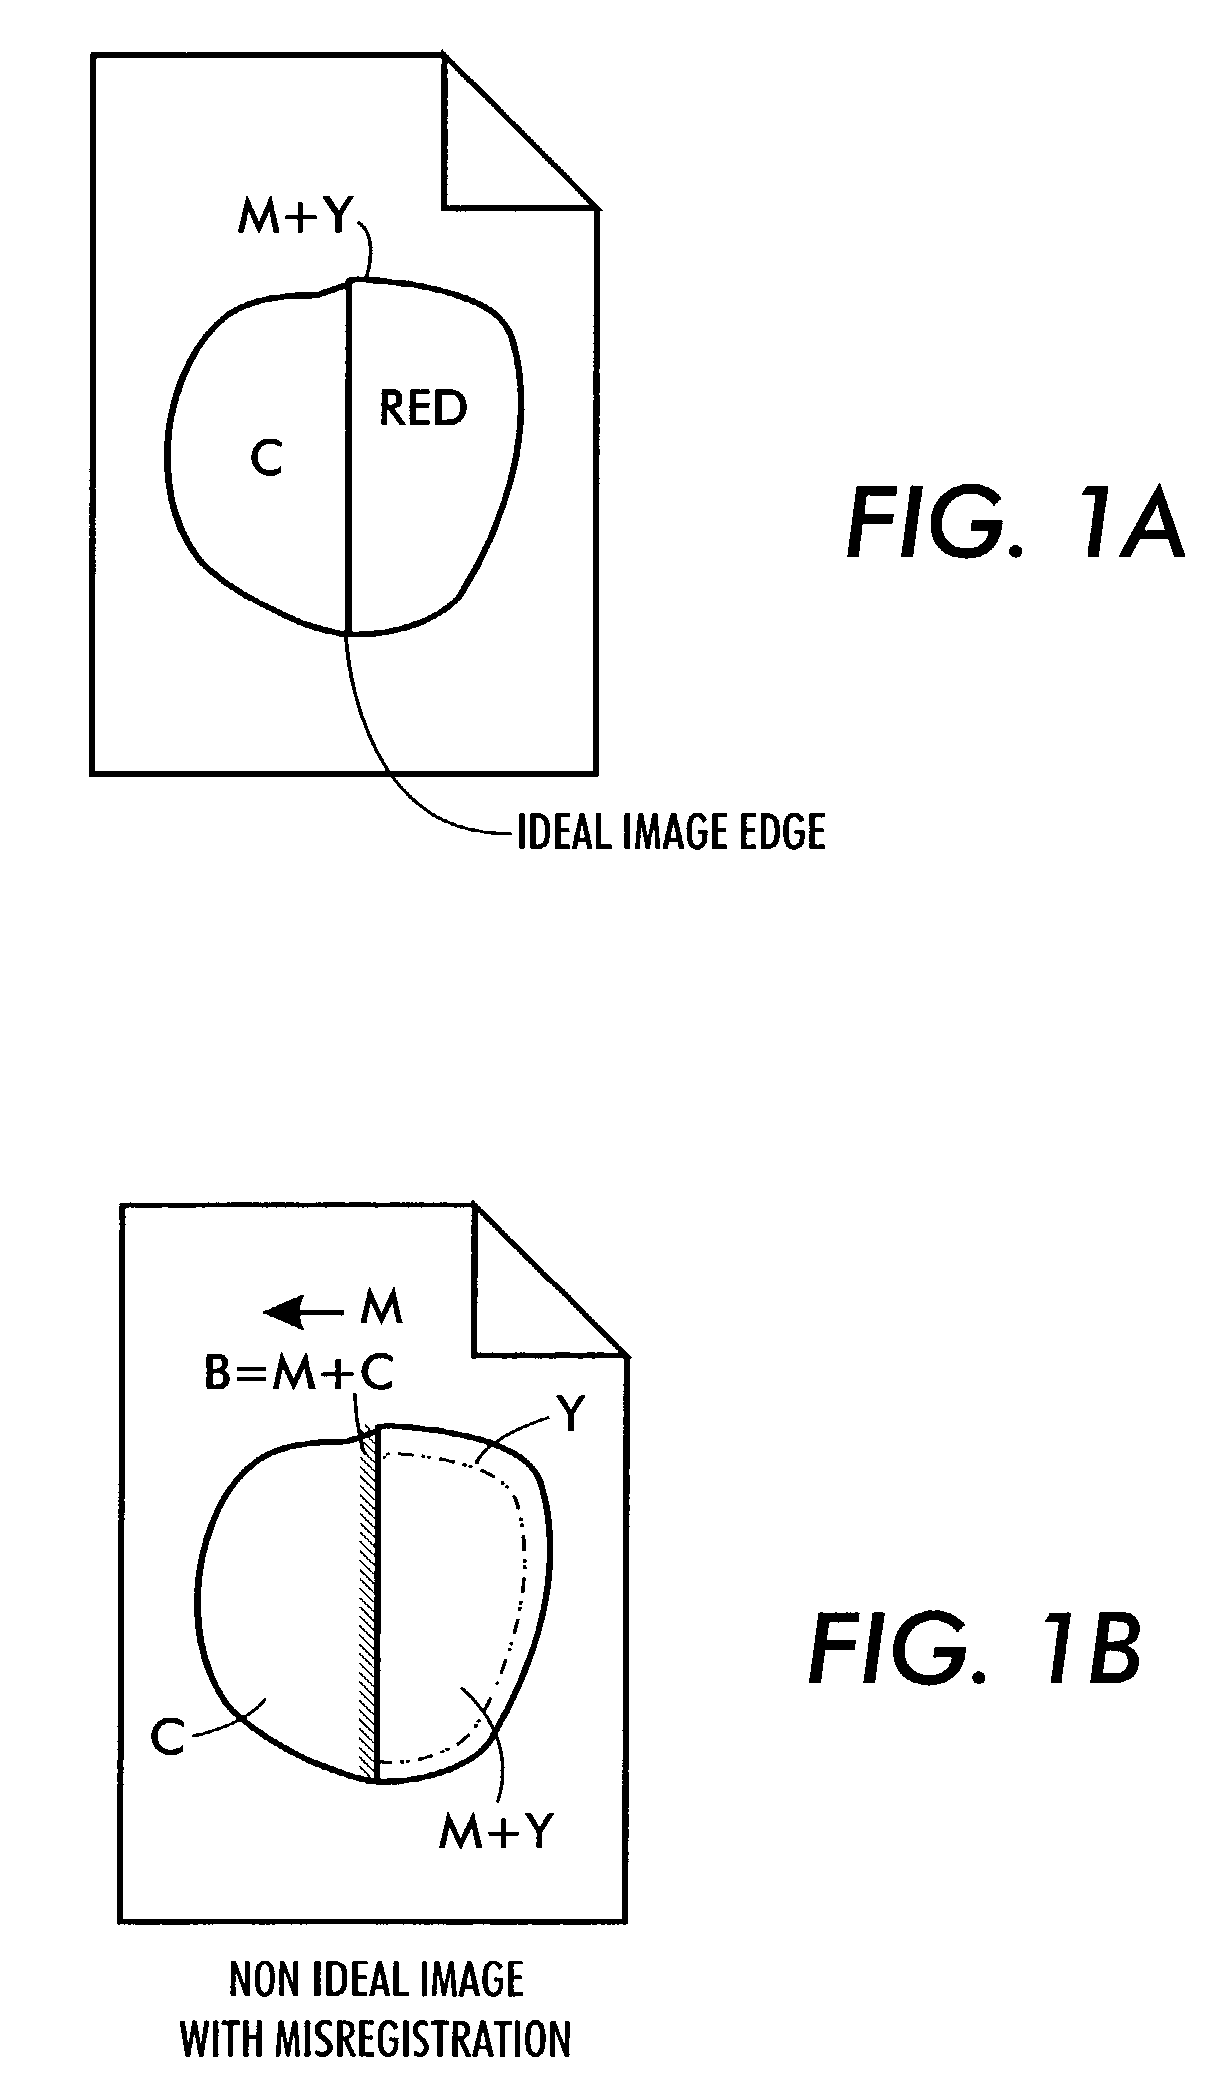 System and method of trapping for correcting for separation misregistration in color printing